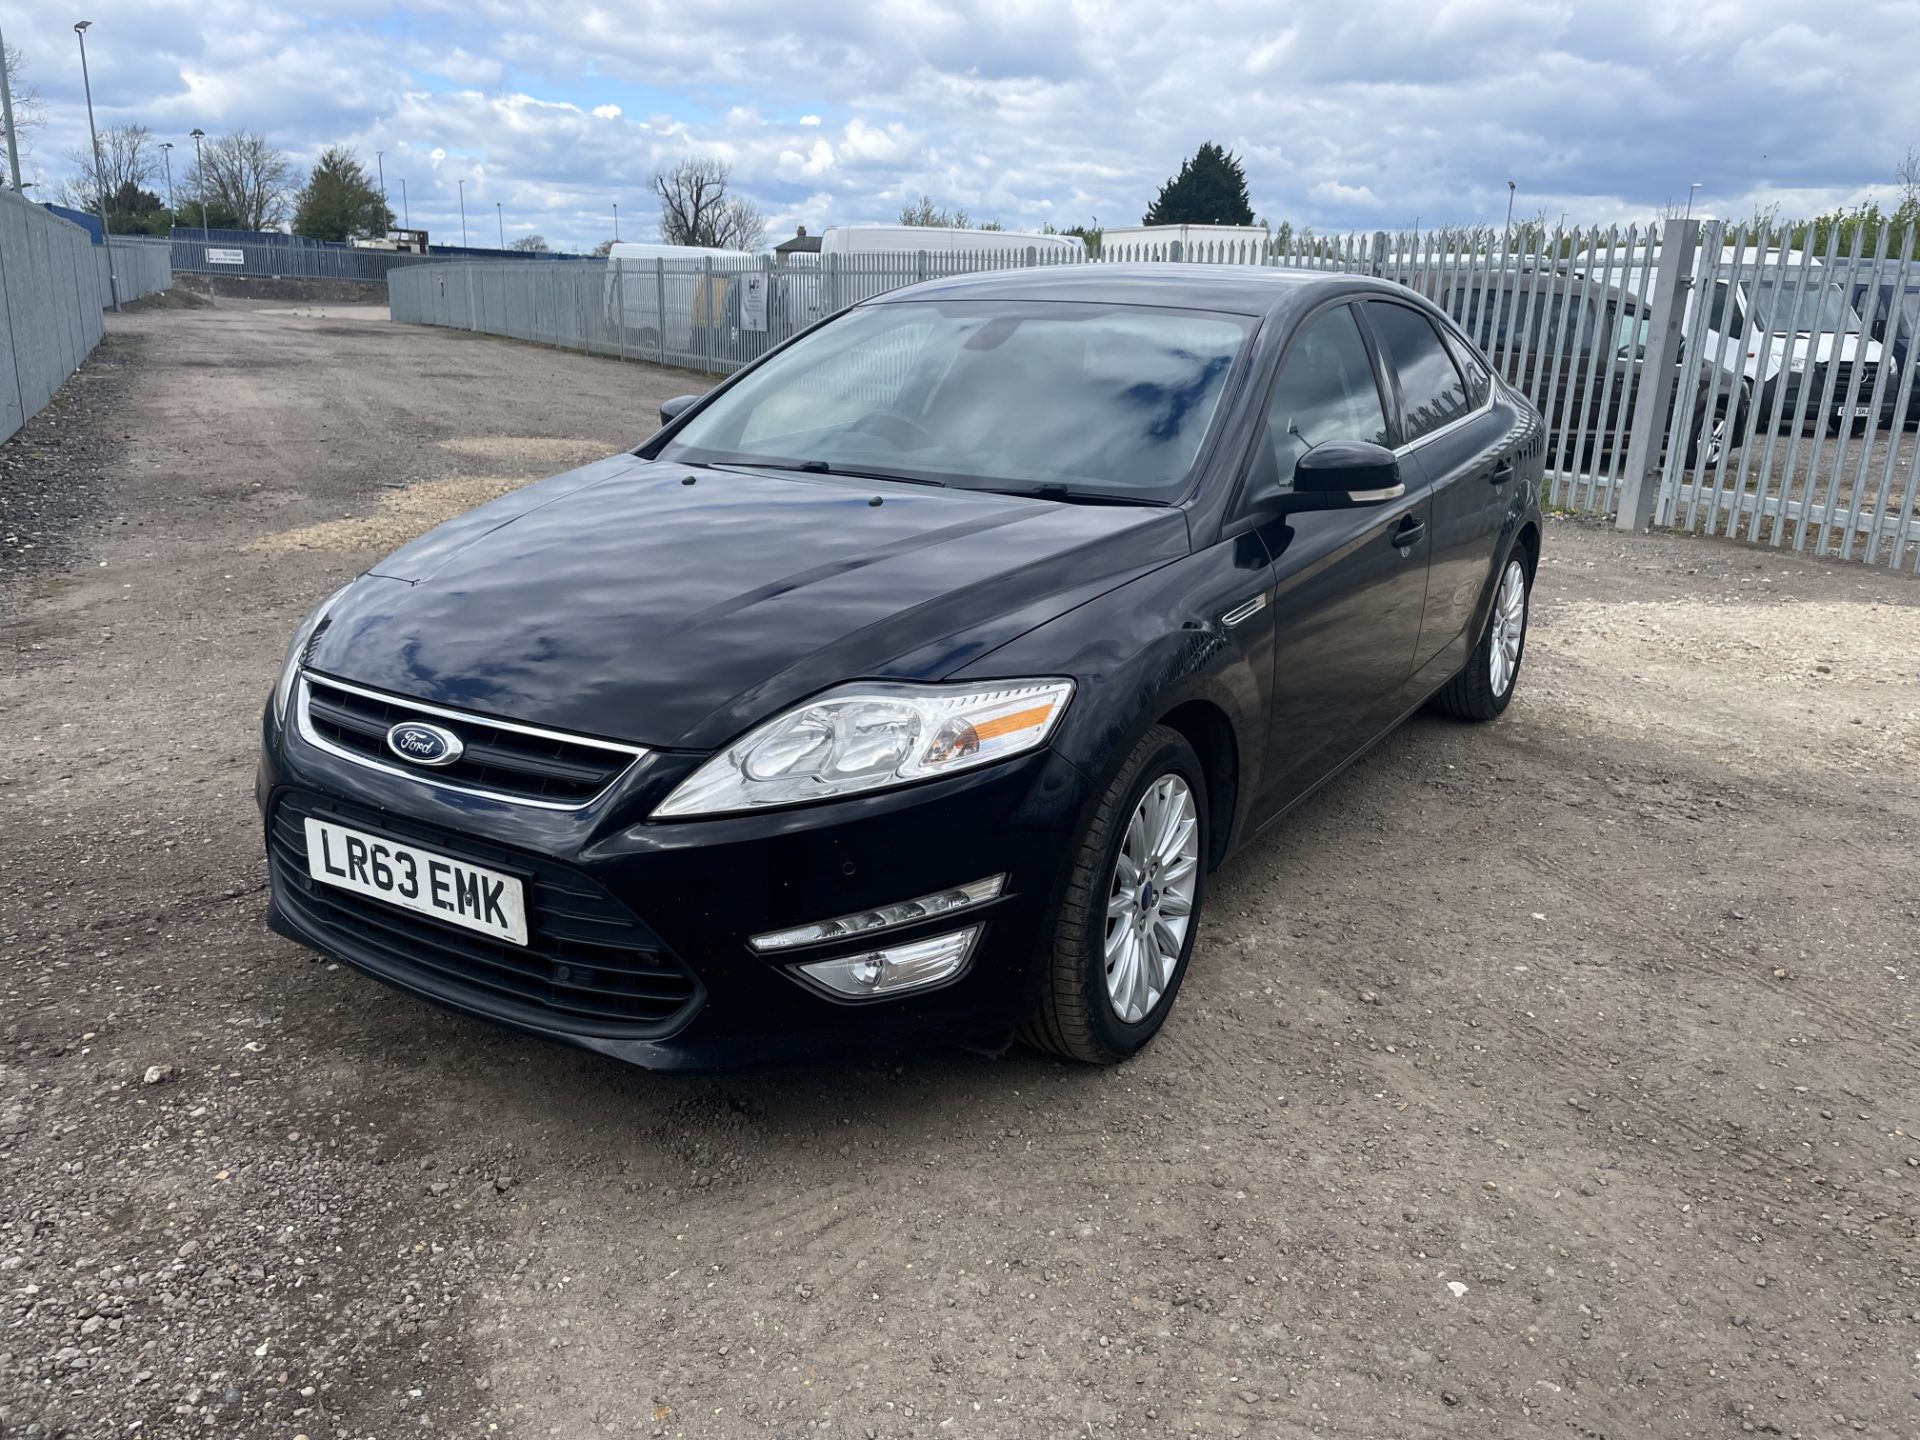 ** ON SALE ** Ford Mondeo TDCI 140 Business Edition Zetec 2.0 2013'63 Reg'-Automatic-Alloy Wheels - Image 3 of 32